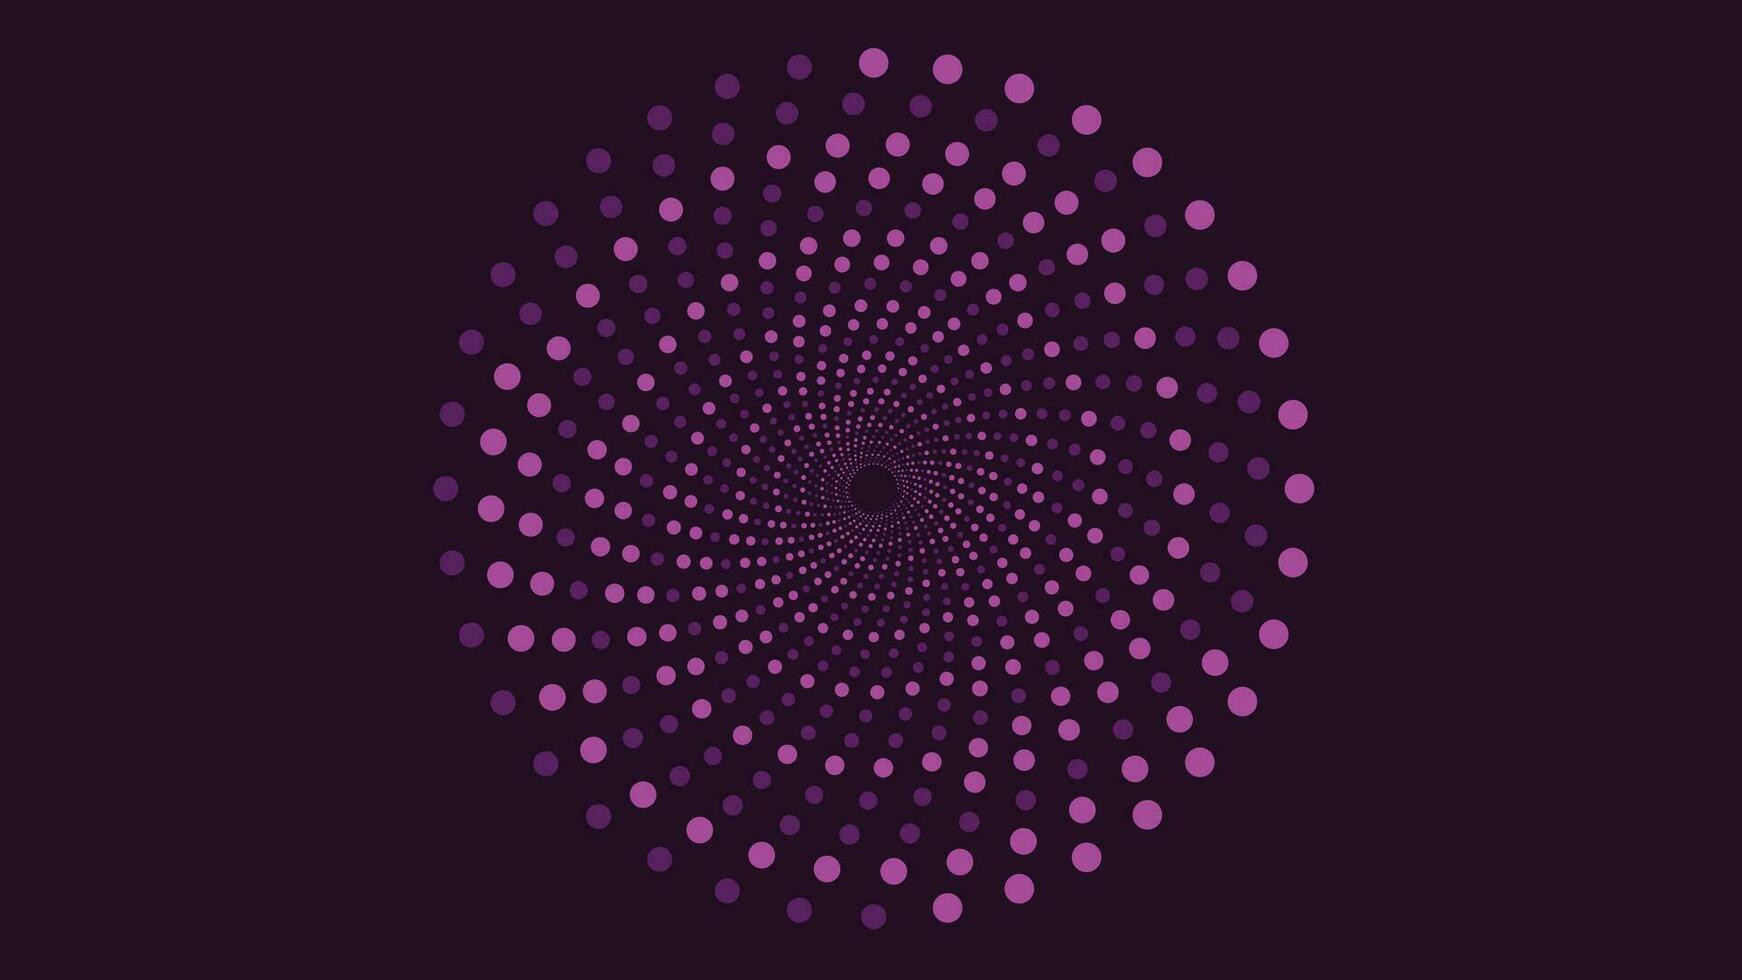 Abstract spiral symbol vortex background in purple and ble vector